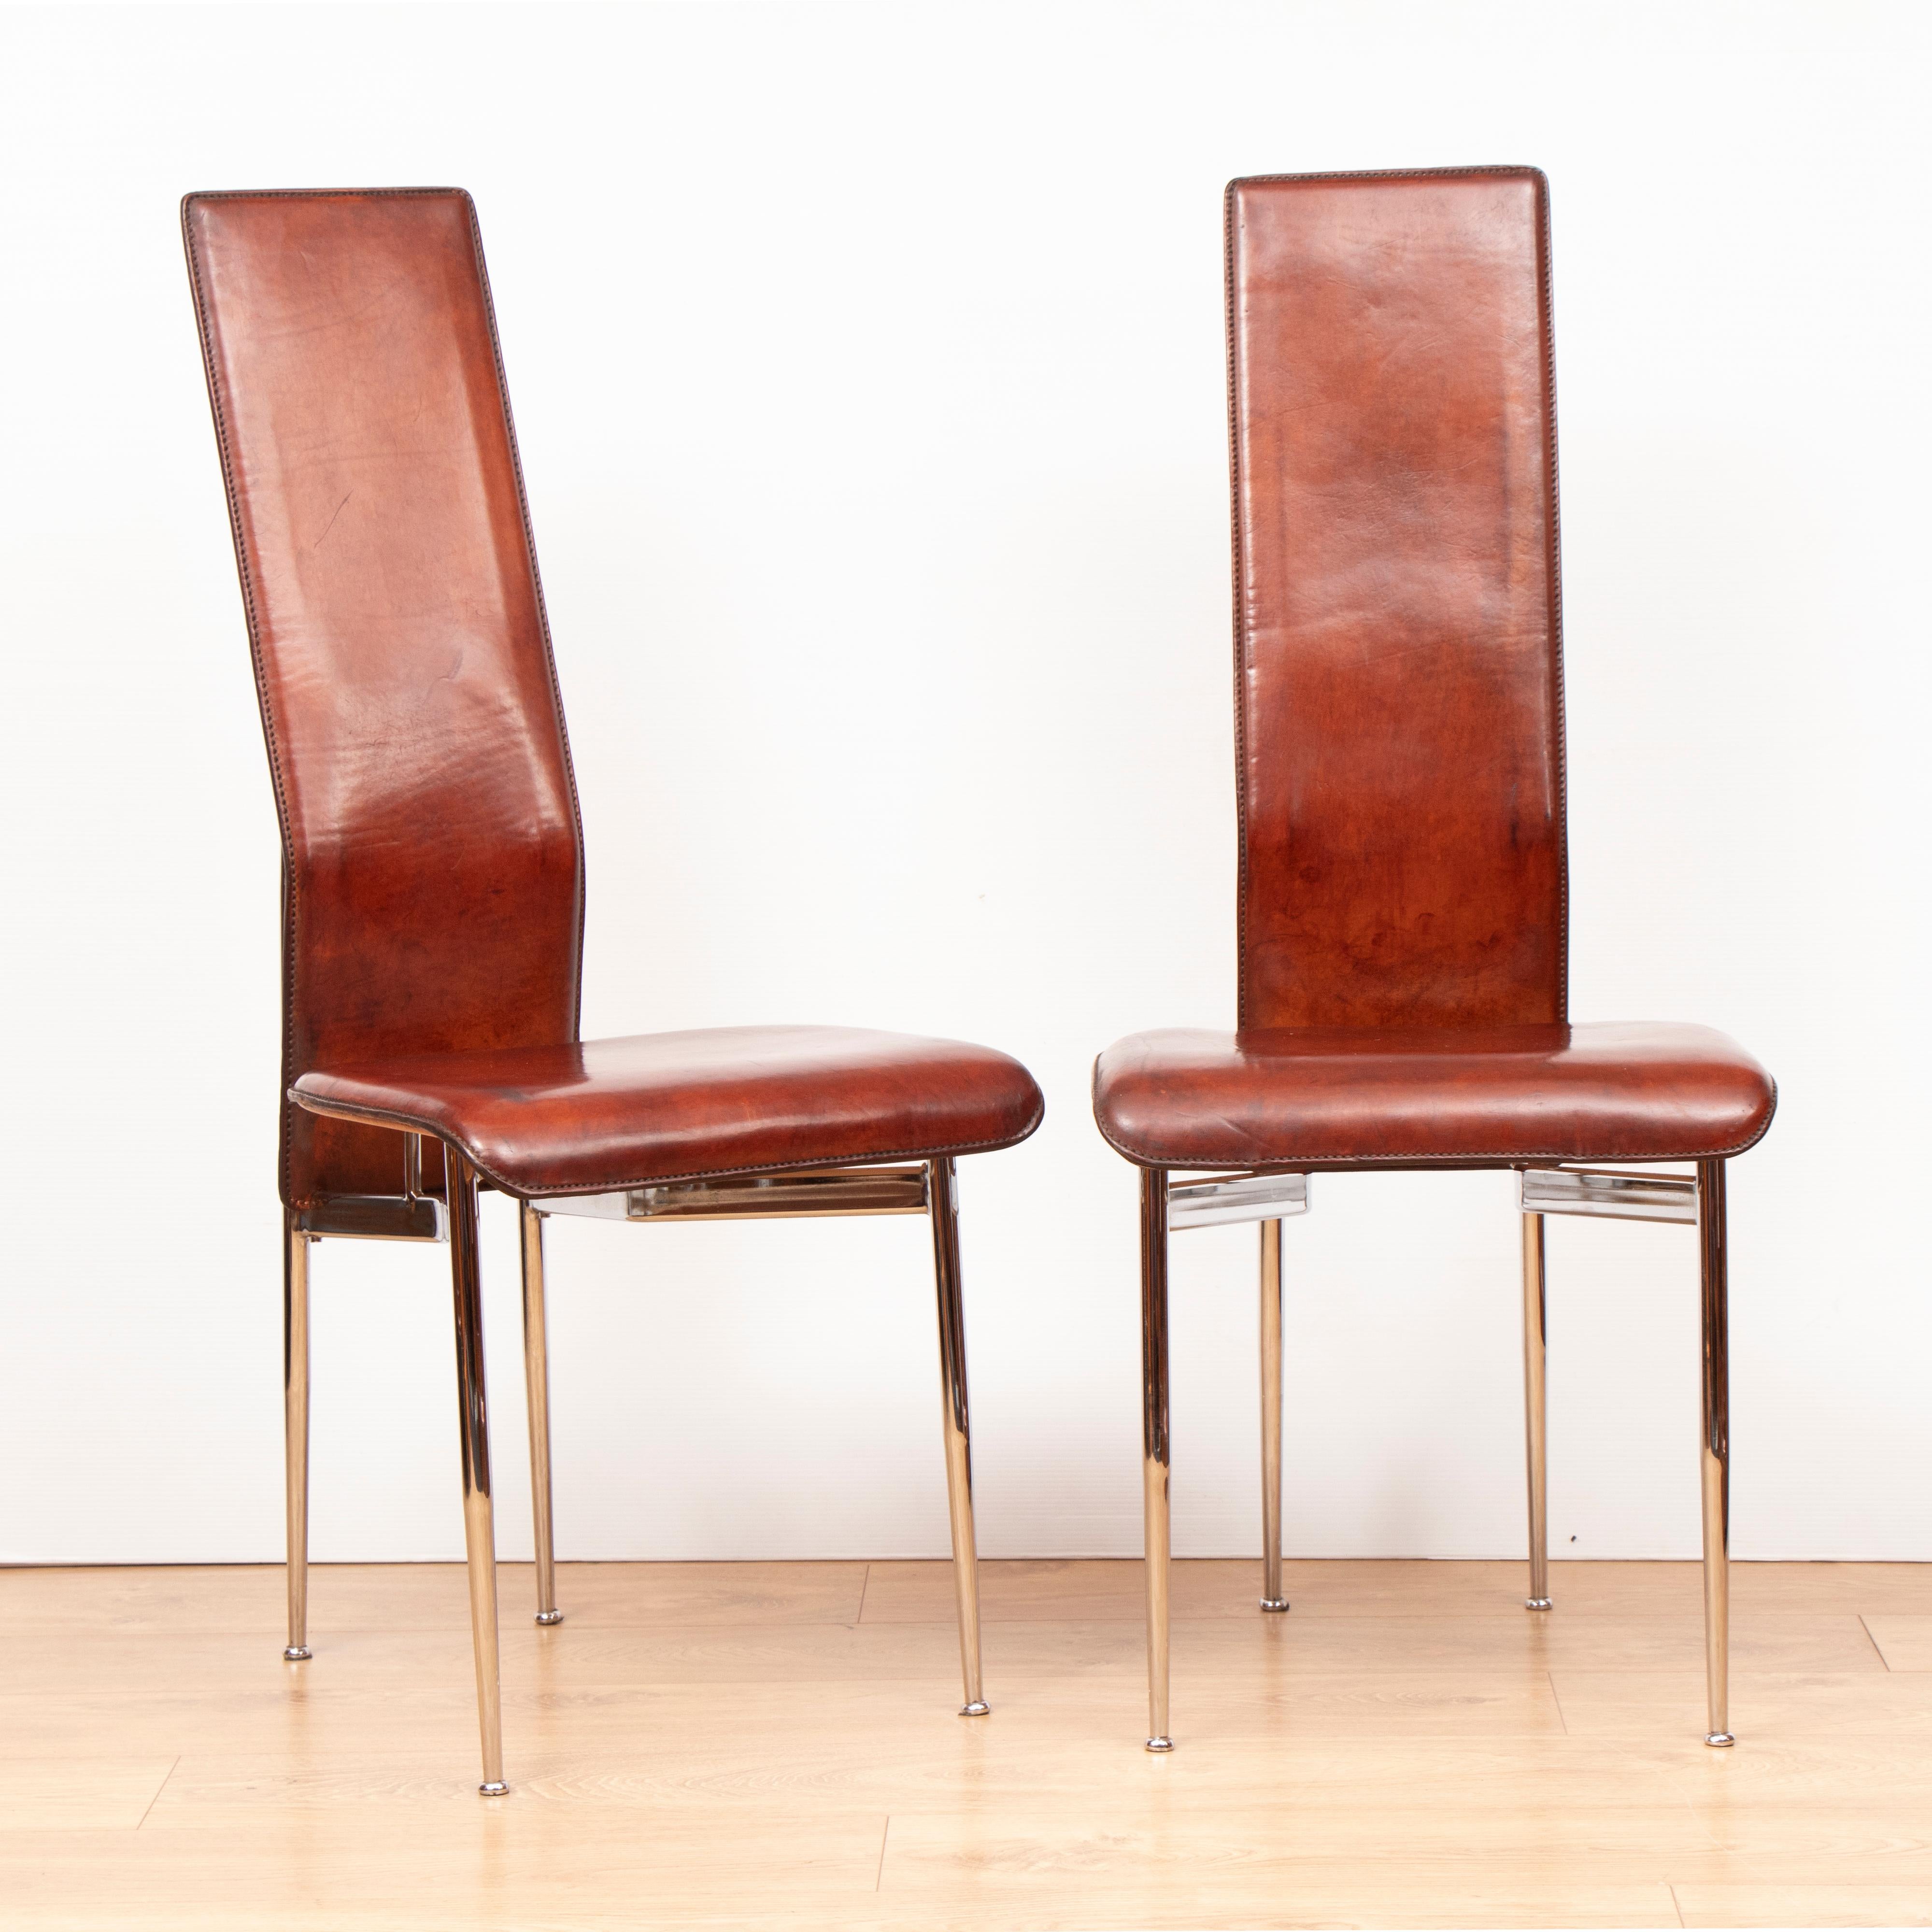 Set of 4 leather S44 dining chairs by Giancarlo Vegni for Fasem, circa 1990.
The chairs have had the bases cleaned and polished and the leather cleaned and revived naturally.

They have a warm chocolate brown vintage color.